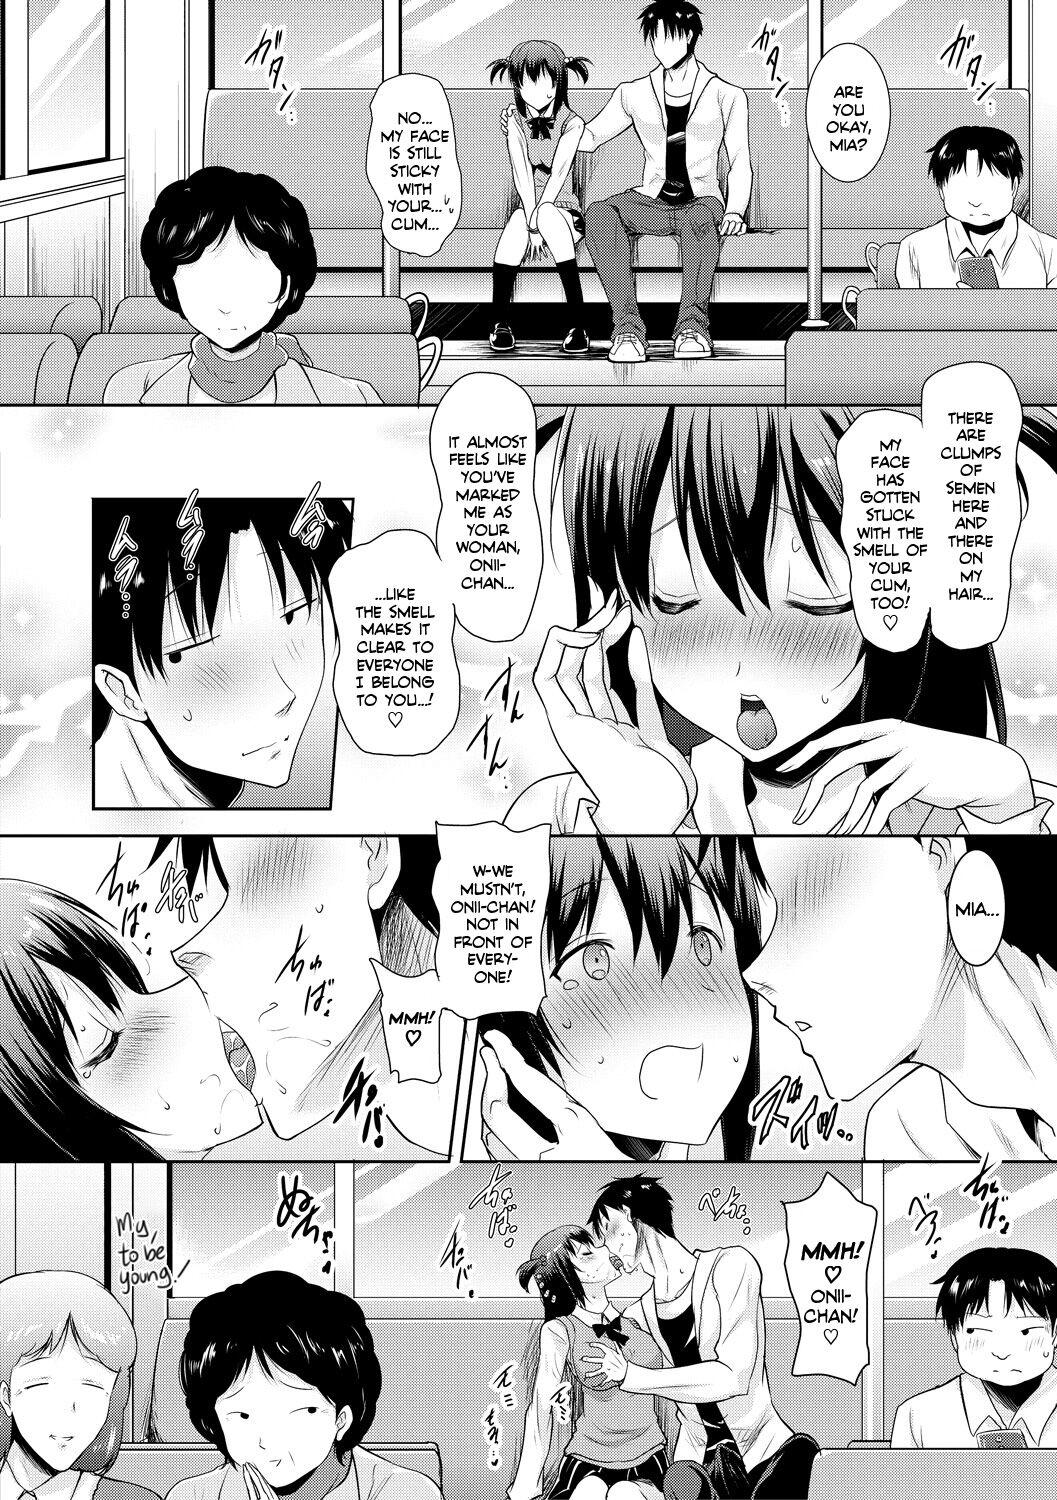 [Pony-R] I Can't Live Without My Little Sister's Tongue Chapter 01-02 + Secret Baby-making Sex with a Big-titted Mother and Daughter! (Kyonyuu Oyako no Shita to Shikyuu ni Renzoku Shasei) [English] [Team Rabu2] [Digital] 26